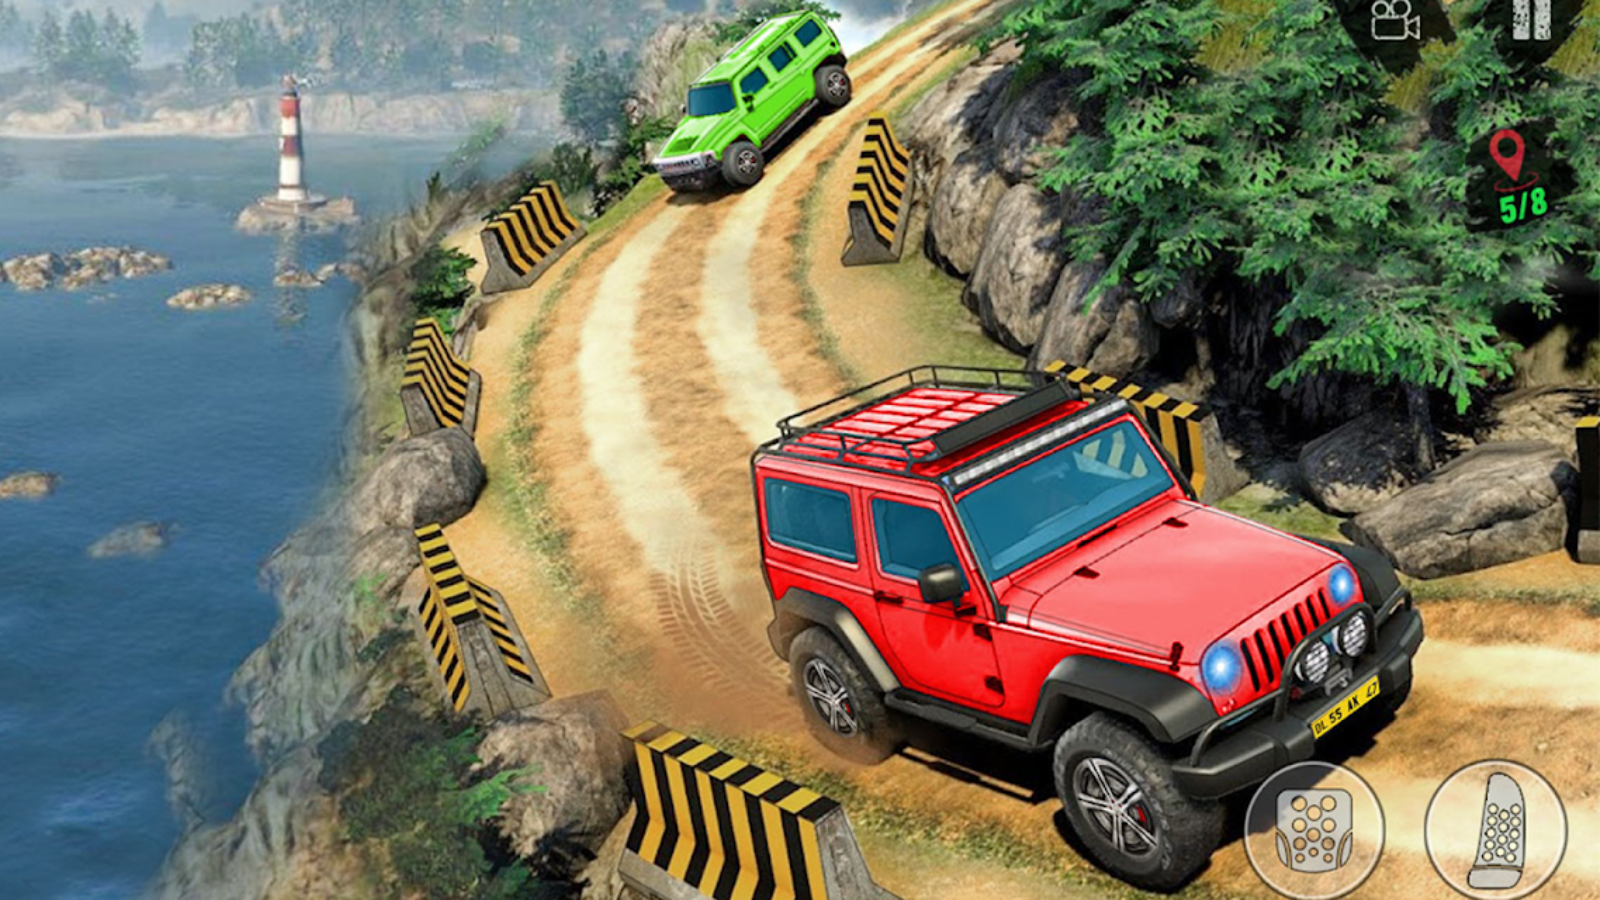 Screenshot 1 of Offroad Jeep Driving 4x4 Games 2